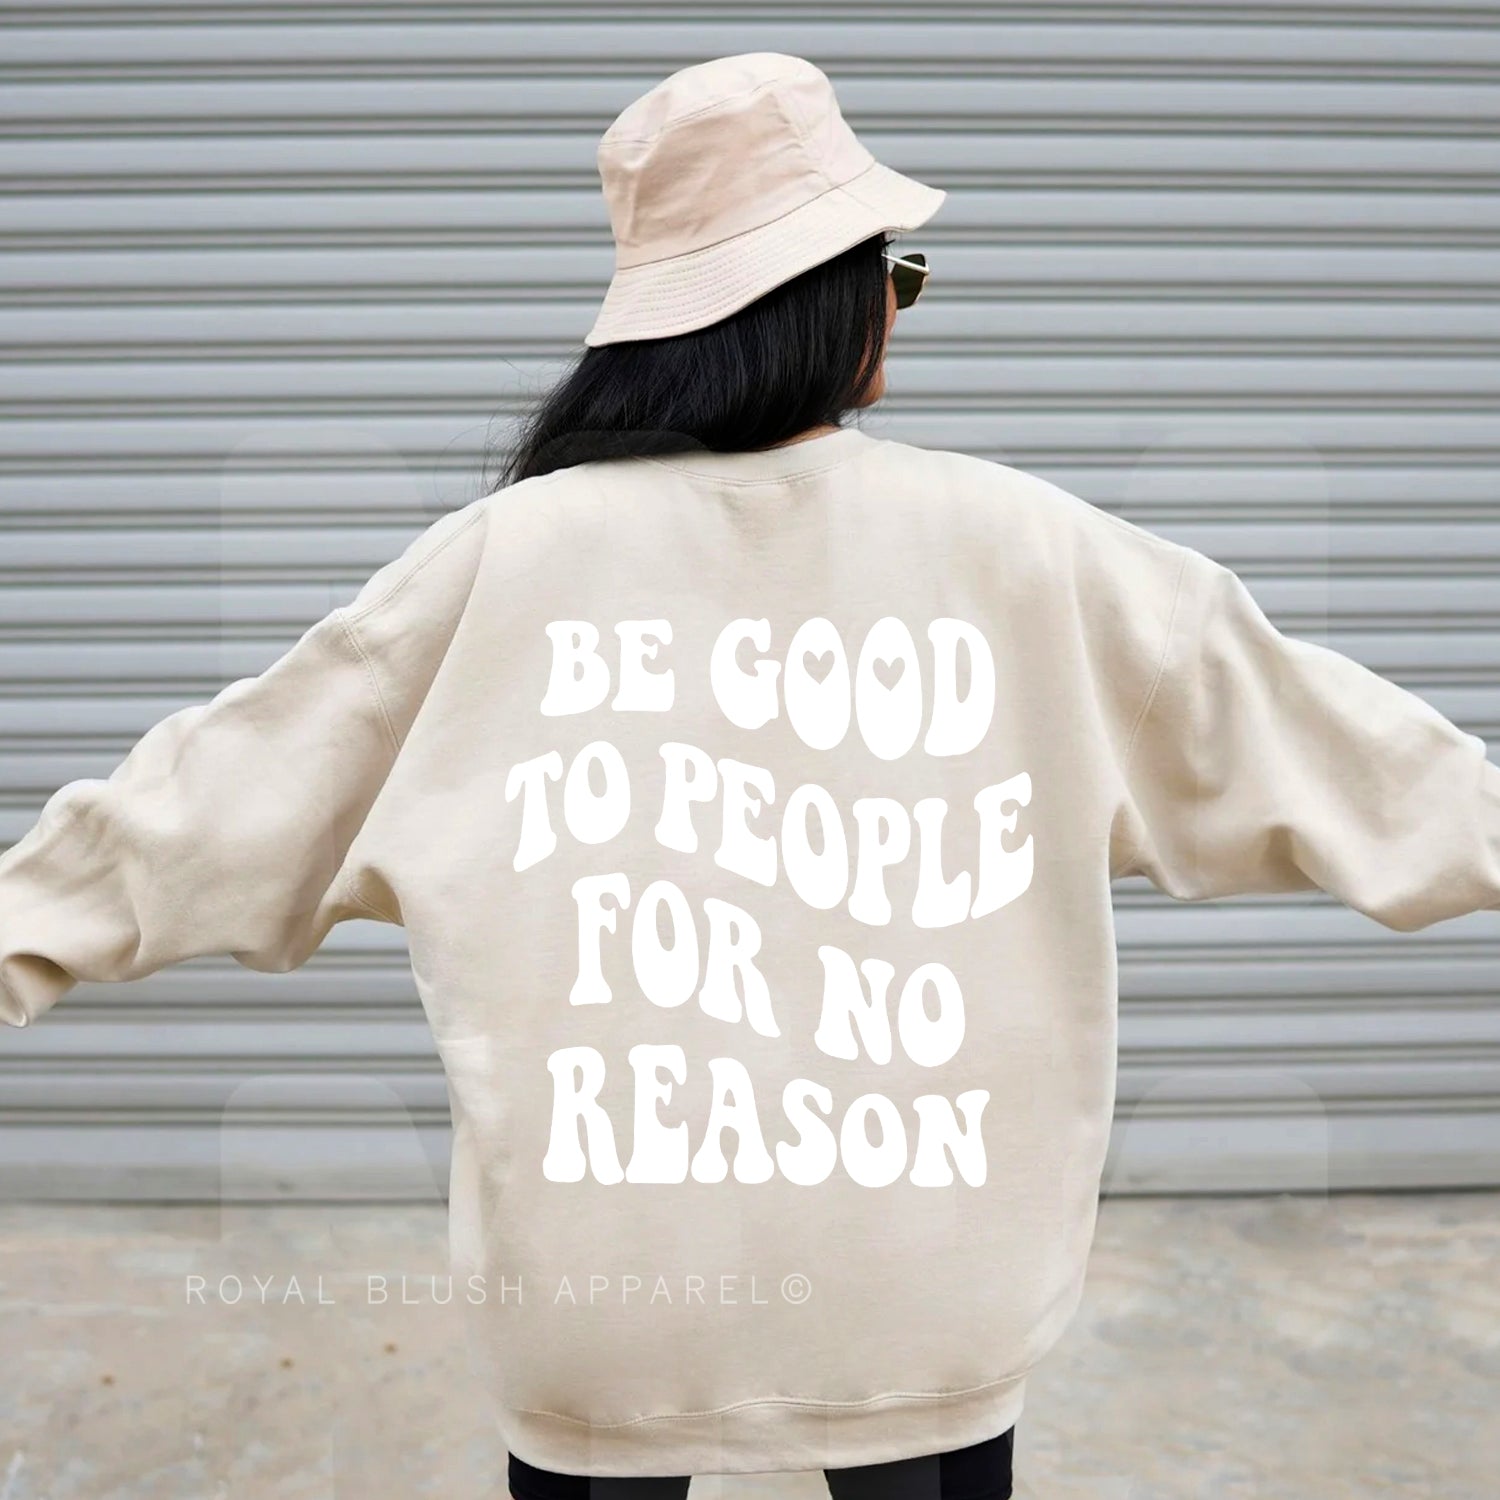 Be Good To People For No Reason Sweatshirt